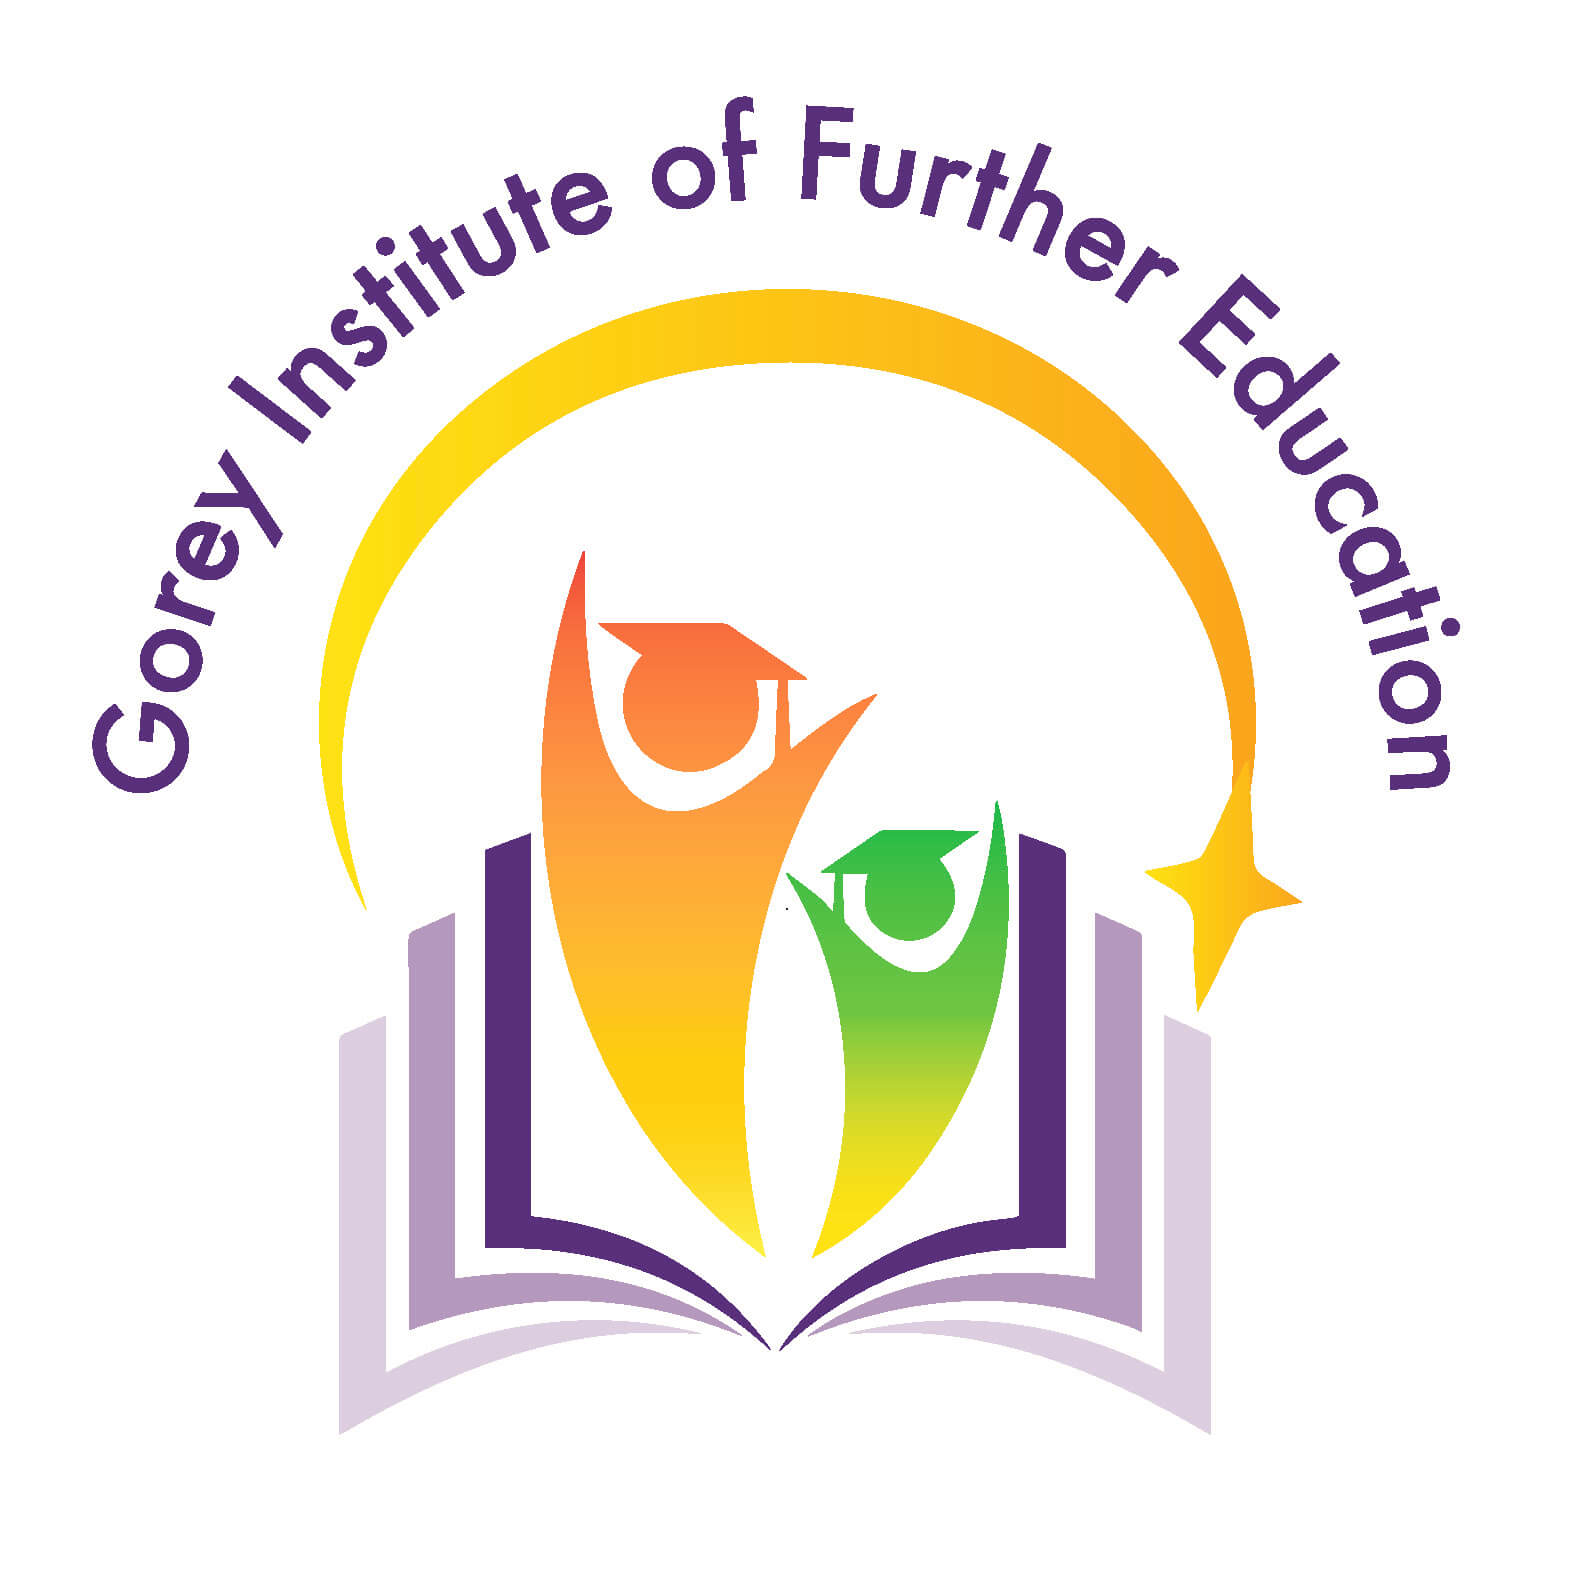 Gorey Institute of Further Education has arrived!